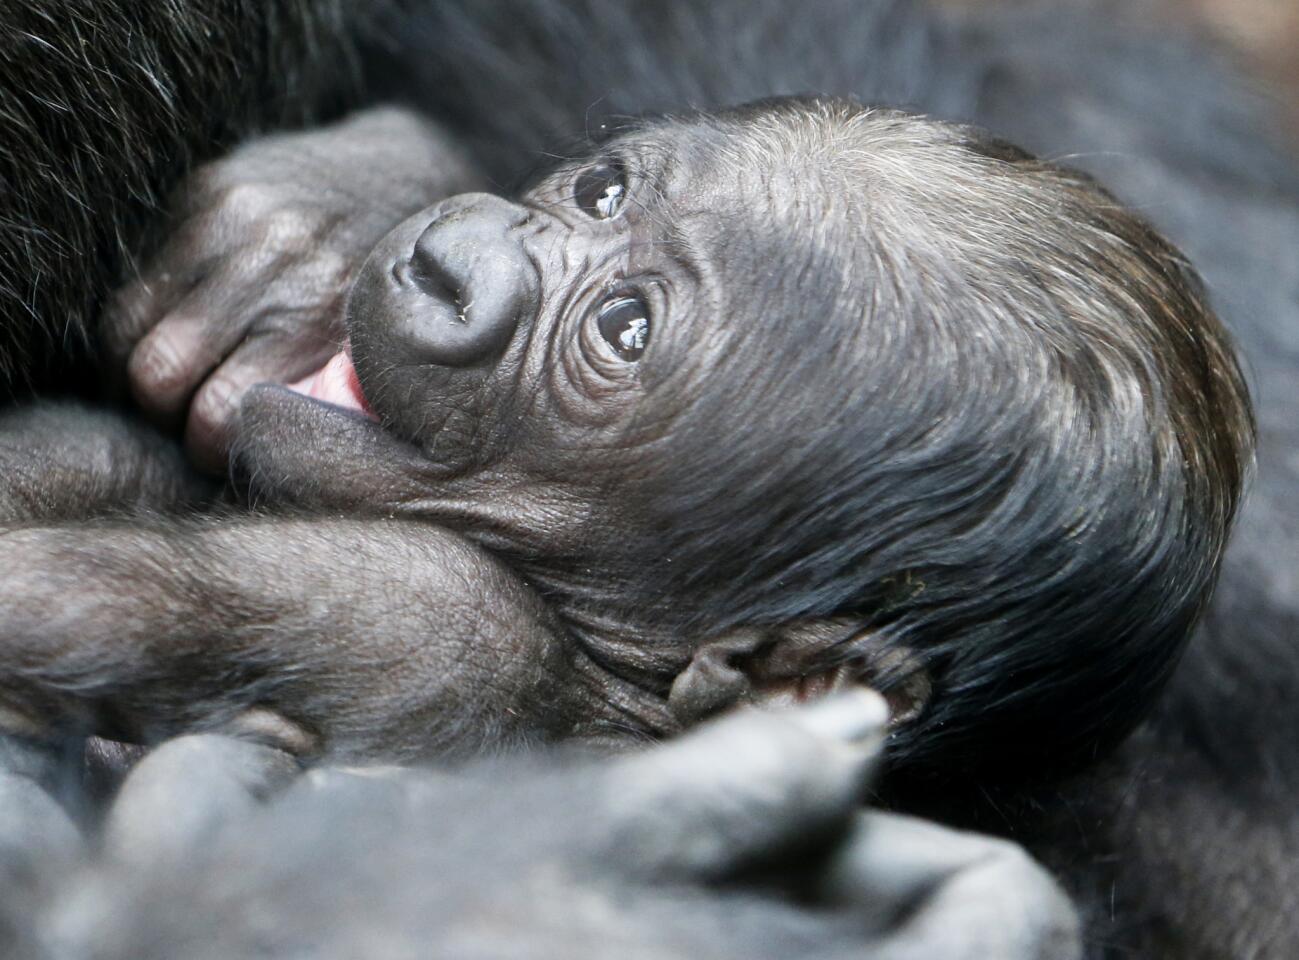 A 6-day-old gorilla baby lies in the arms of its mother Shira at the zoo in Frankfurt, Germany, on Sept. 21, 2016.